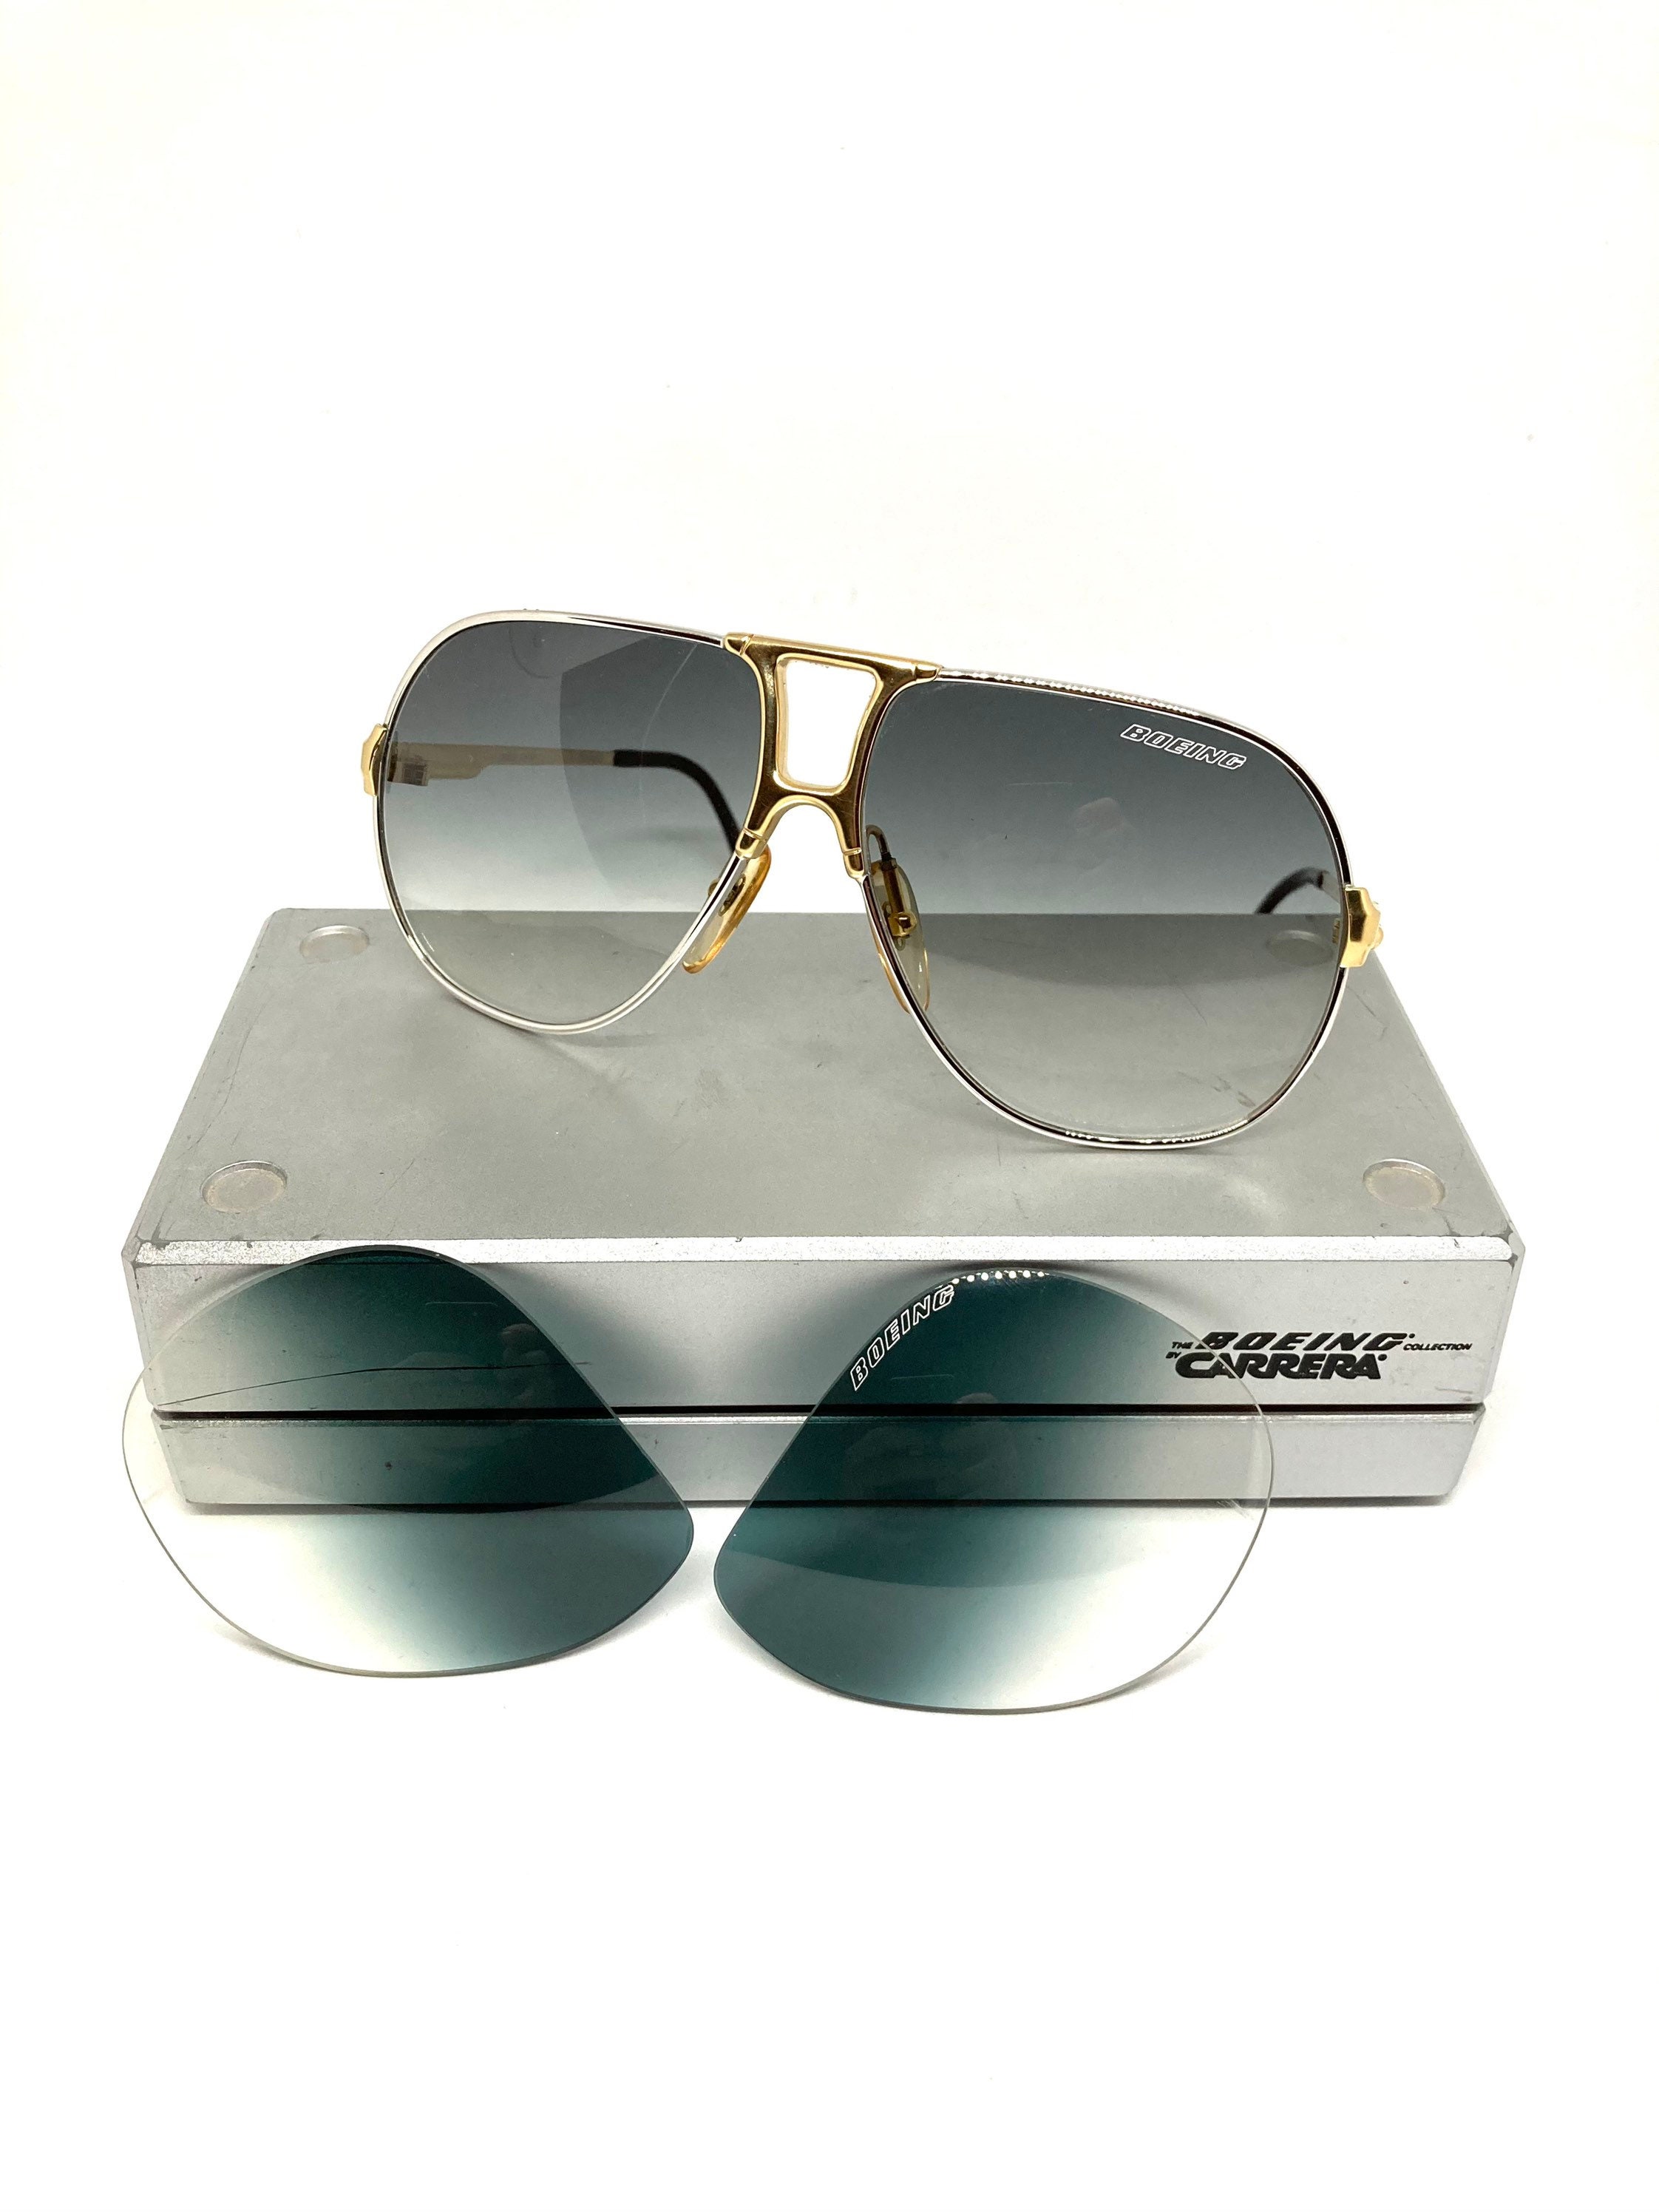 Buy Vintage Carrera Boeing 5700 41 60-12 Small Sunglasses Online in India -  Etsy